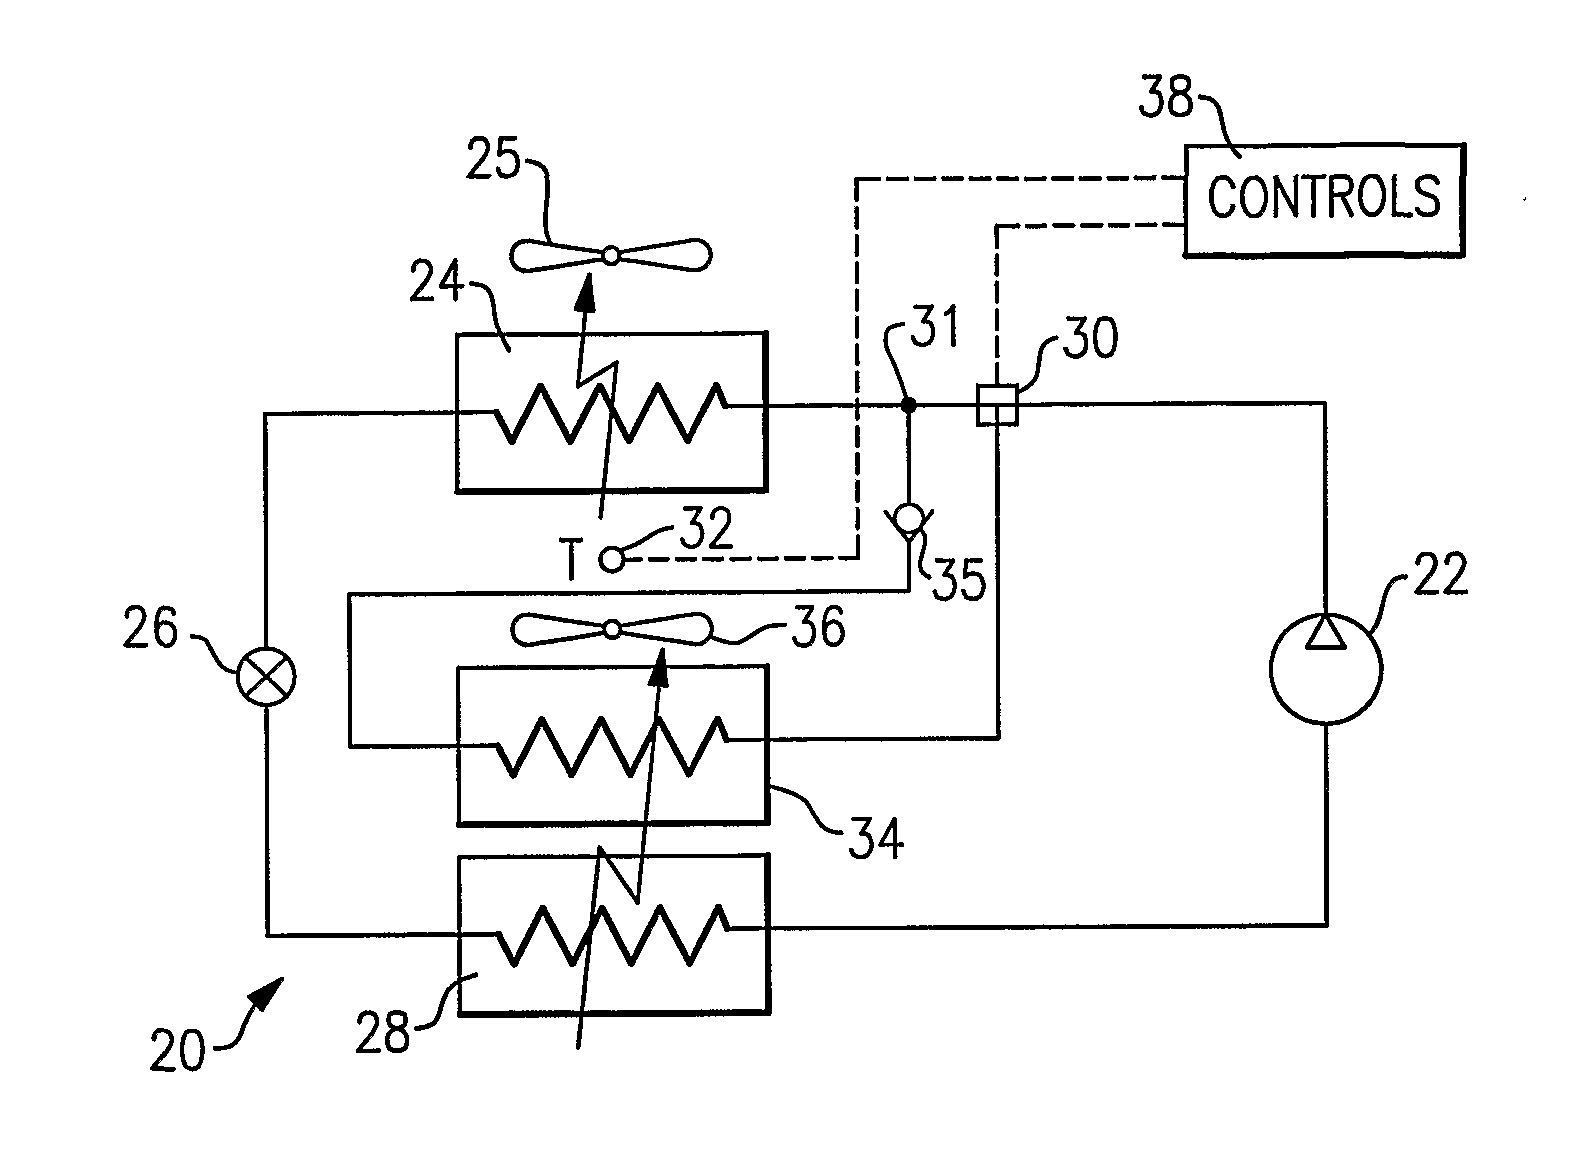 System Reheat Control by Pulse Width Modulation